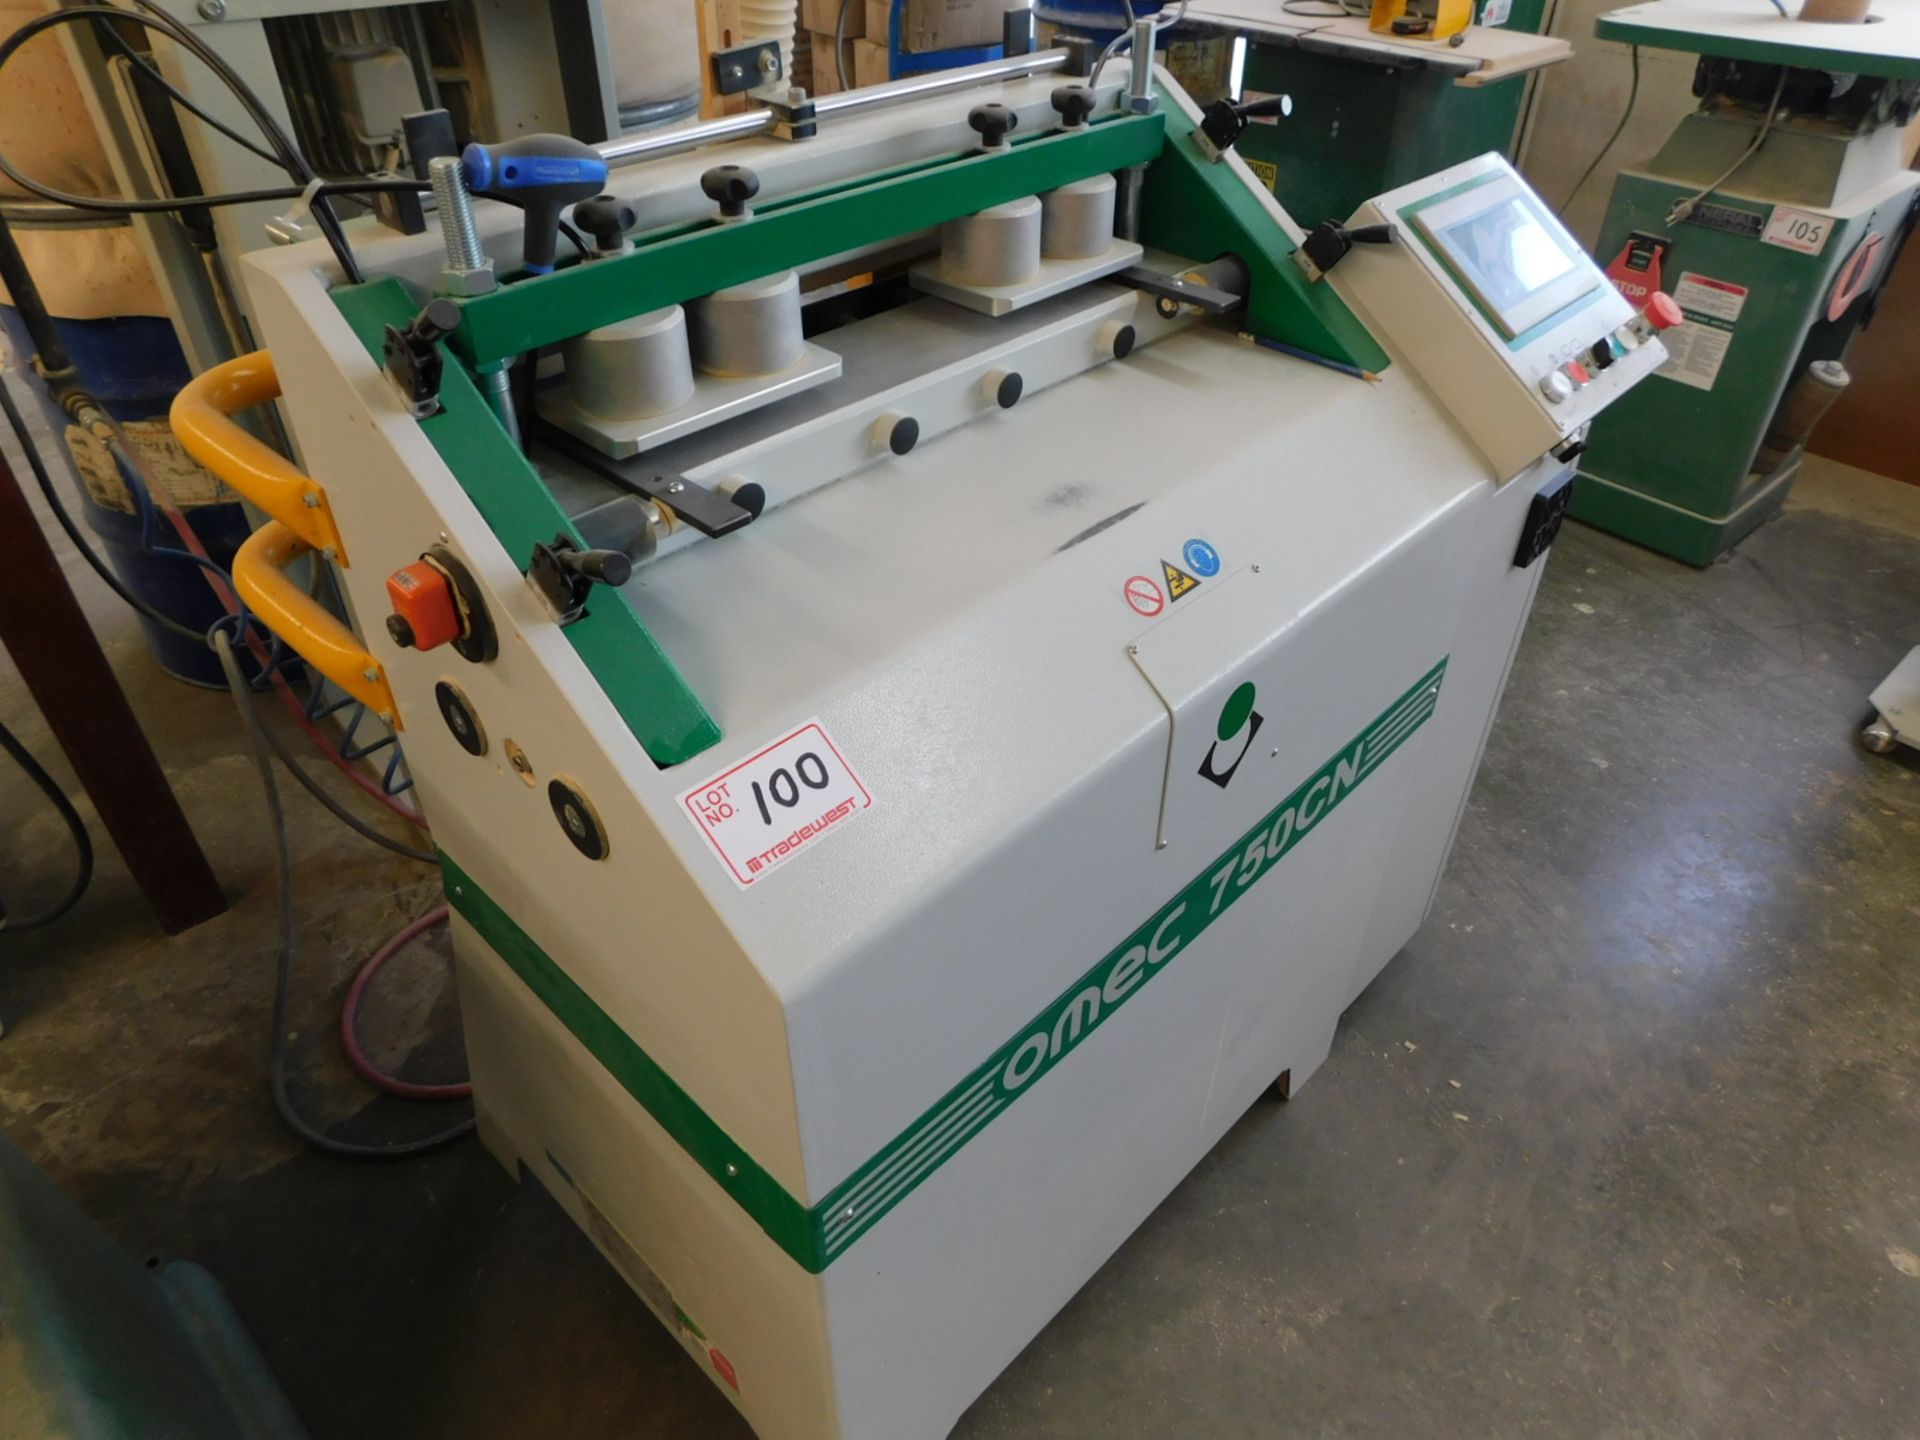 2020 OMEC 750CN CNC DOVE TAIL MACHINE, 220V, TOUCH SCREEN CONTROLS, S/N 200130 - Image 2 of 6